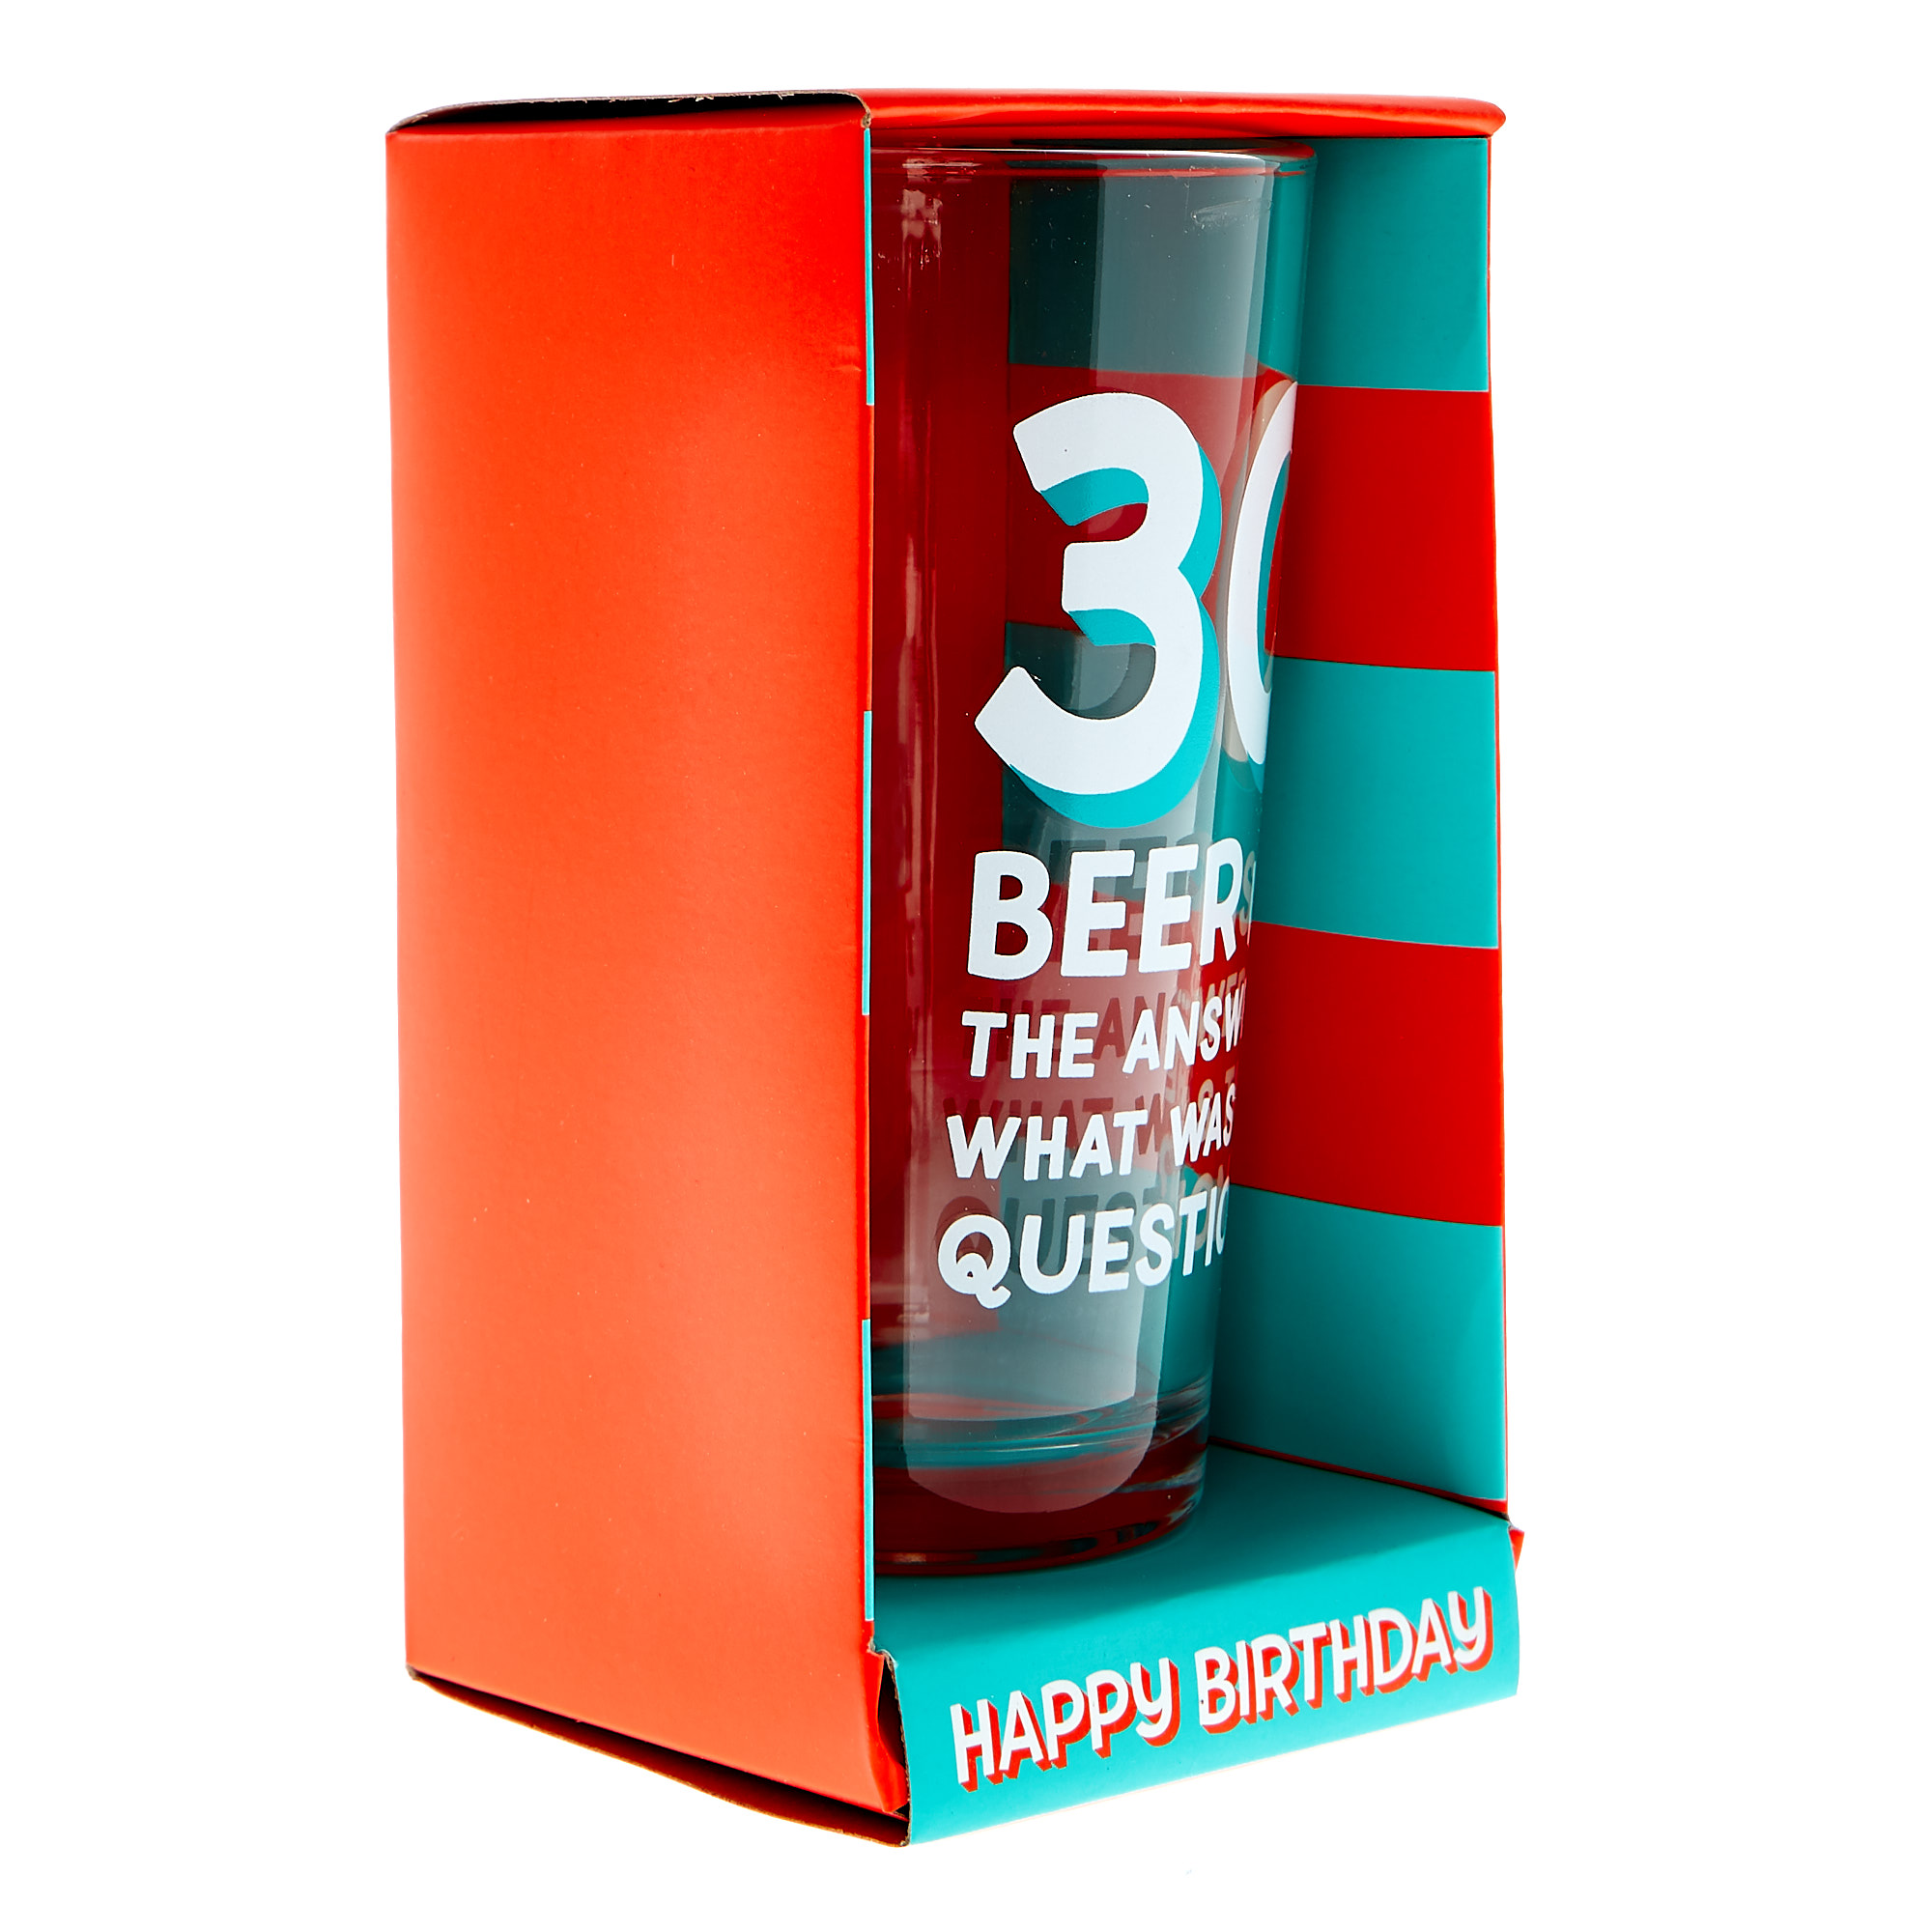 30th Birthday Pint Glass - Beer Is The Answer